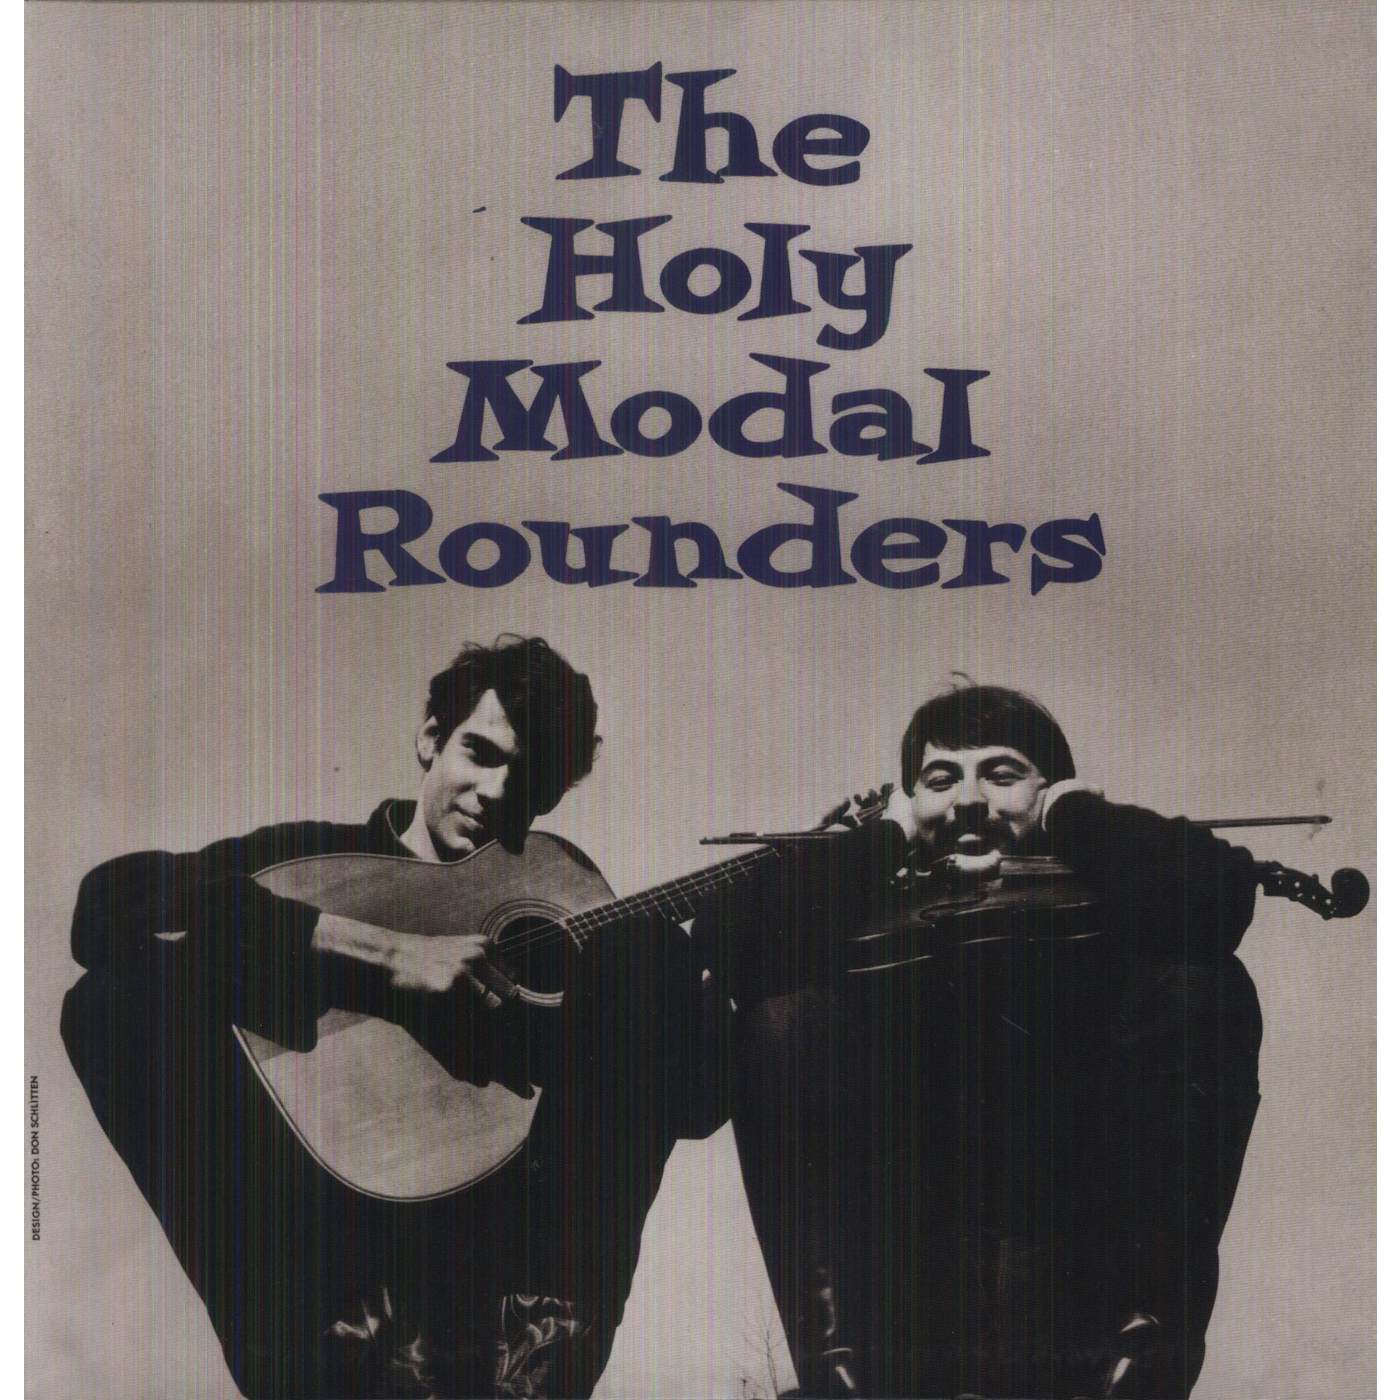 The Holy Modal Rounders Vinyl Record